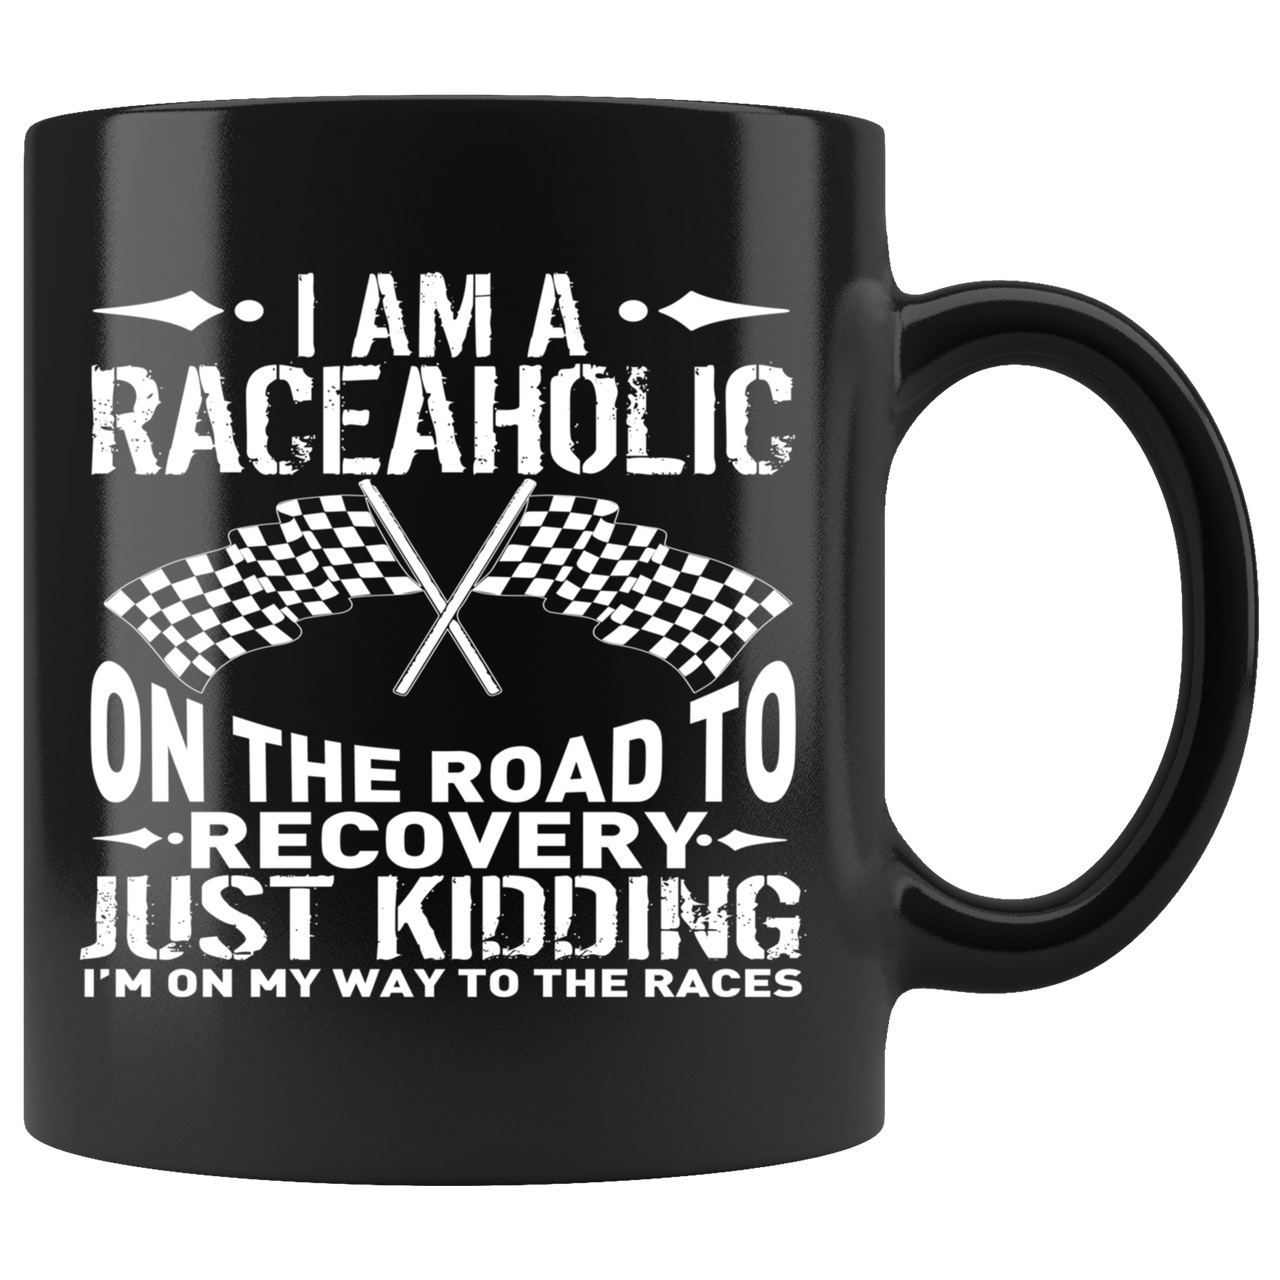 I'm A Raceaholic On The Road To Recovery Just kidding I'm On My Way To Races Mug!